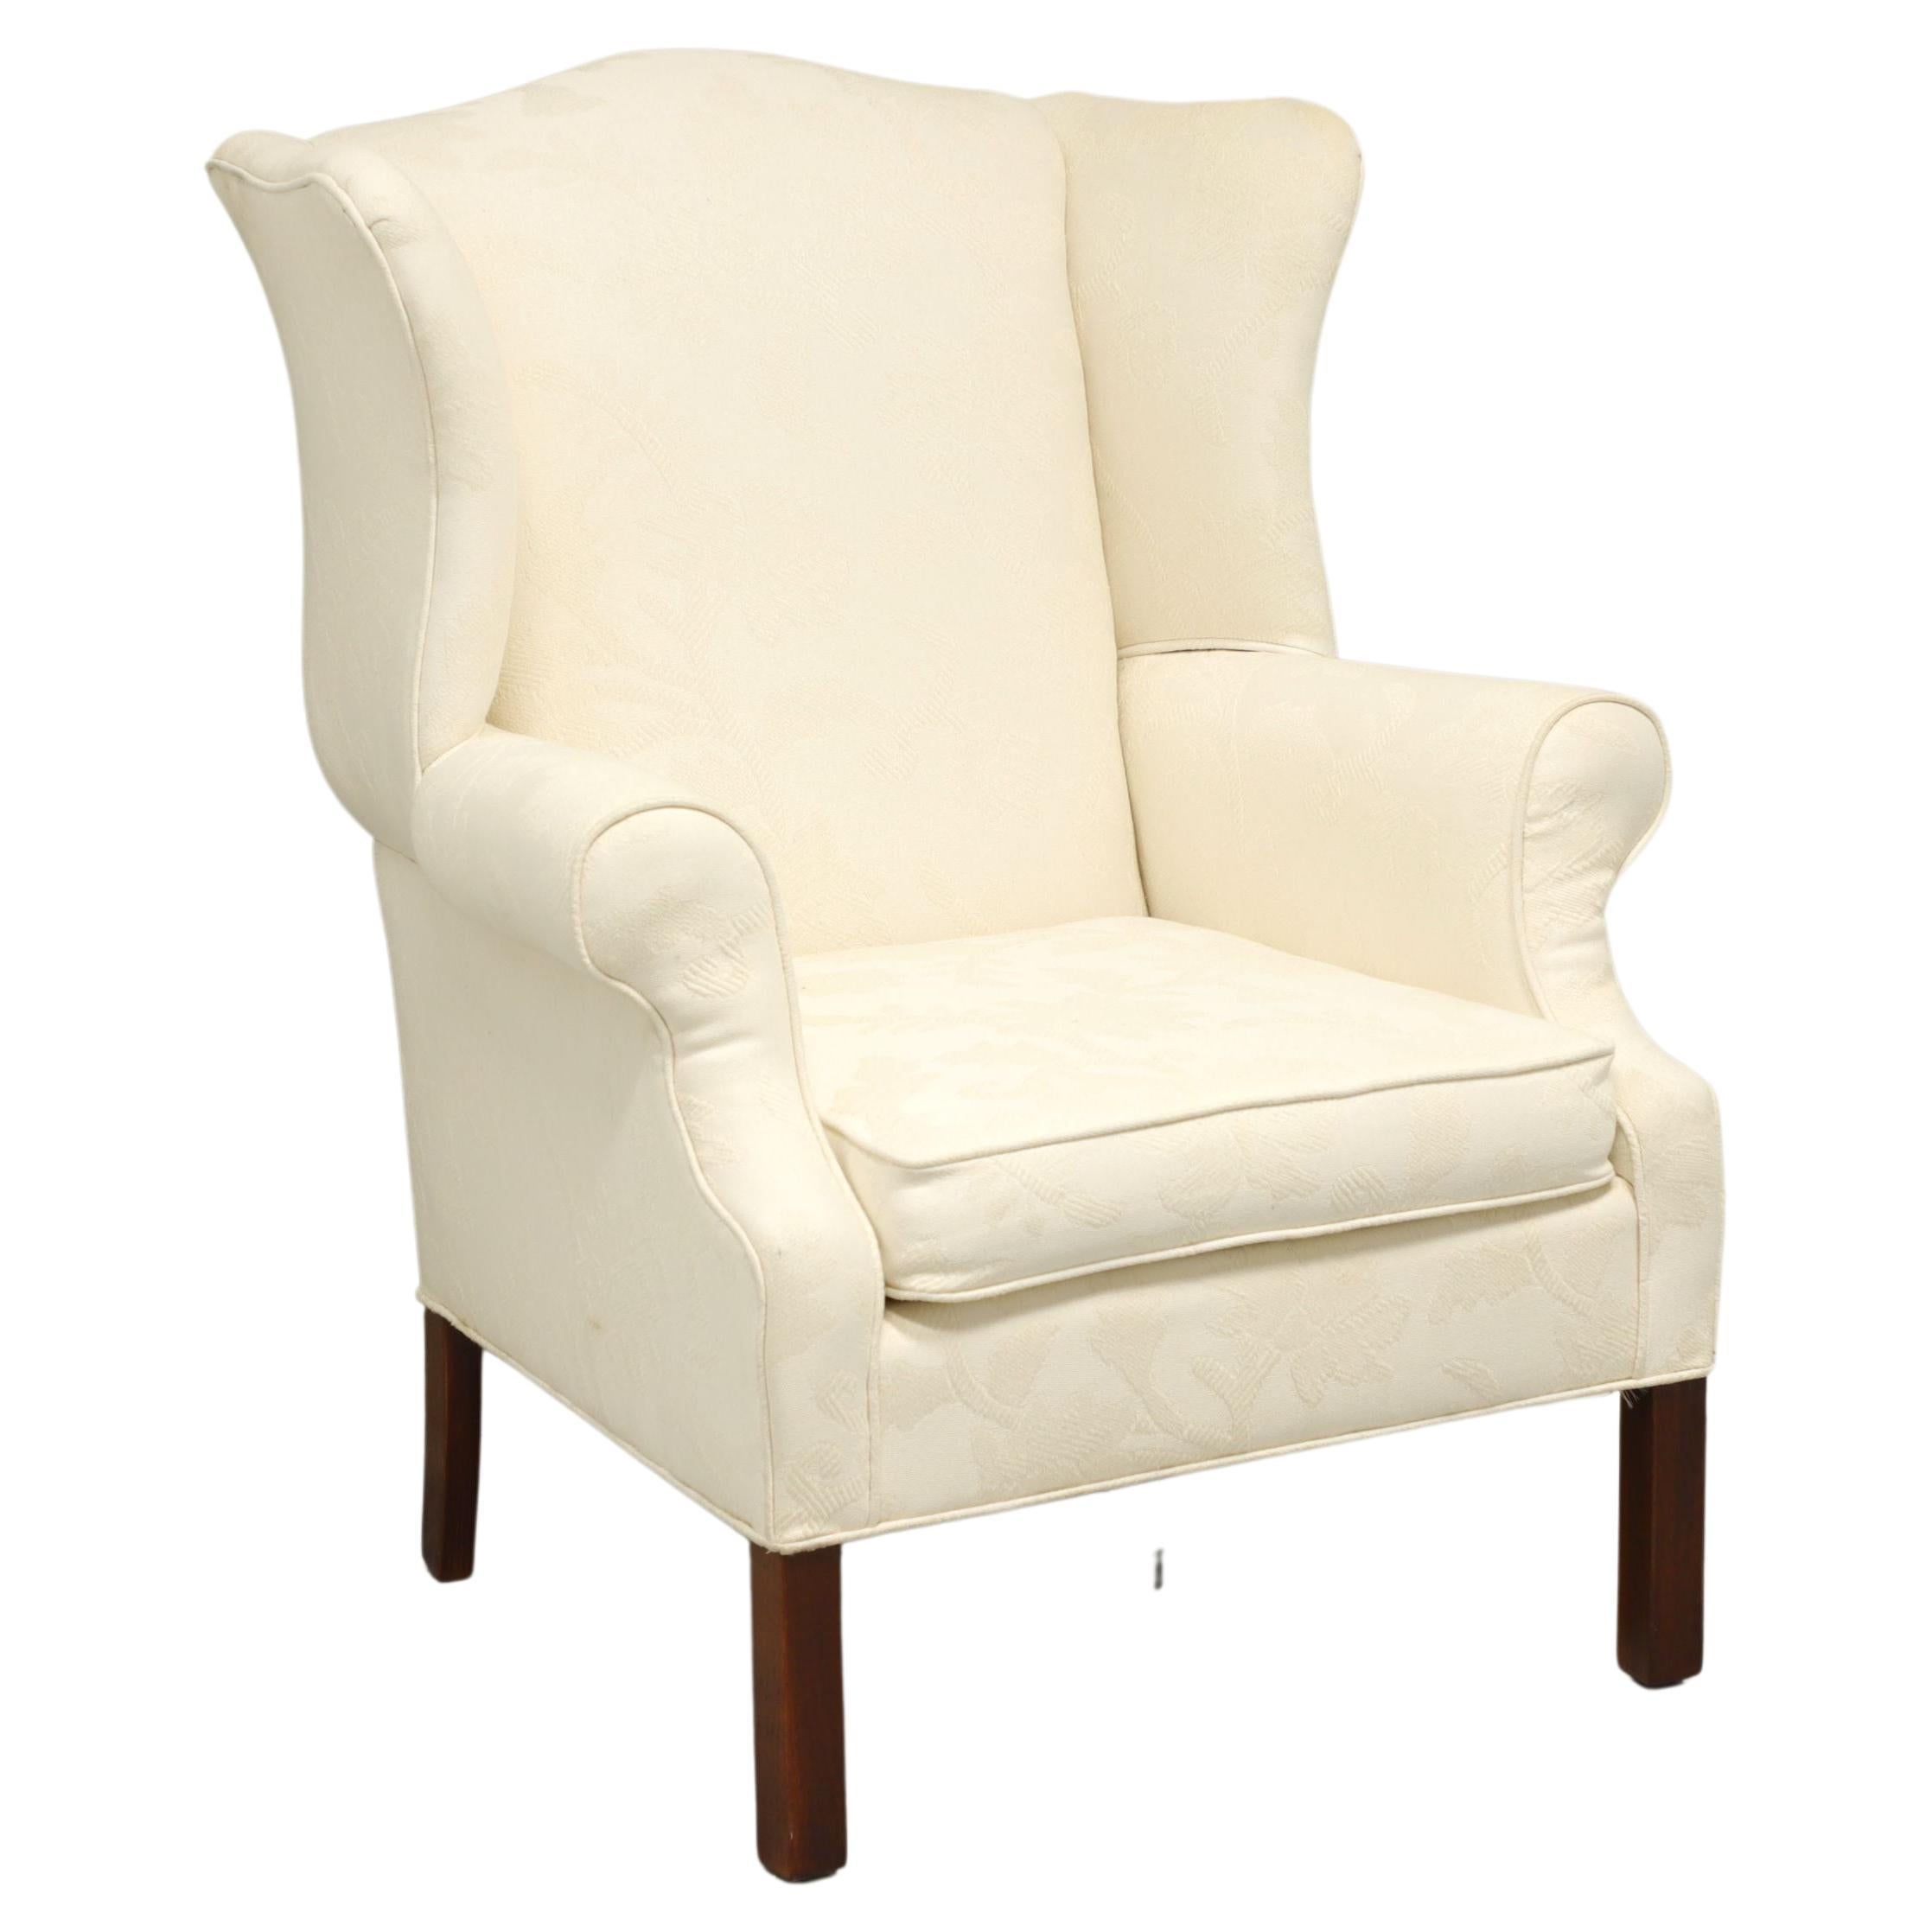 Vintage Mahogany Frame Chippendale Style Wing Back Chair in Neutral Fabric